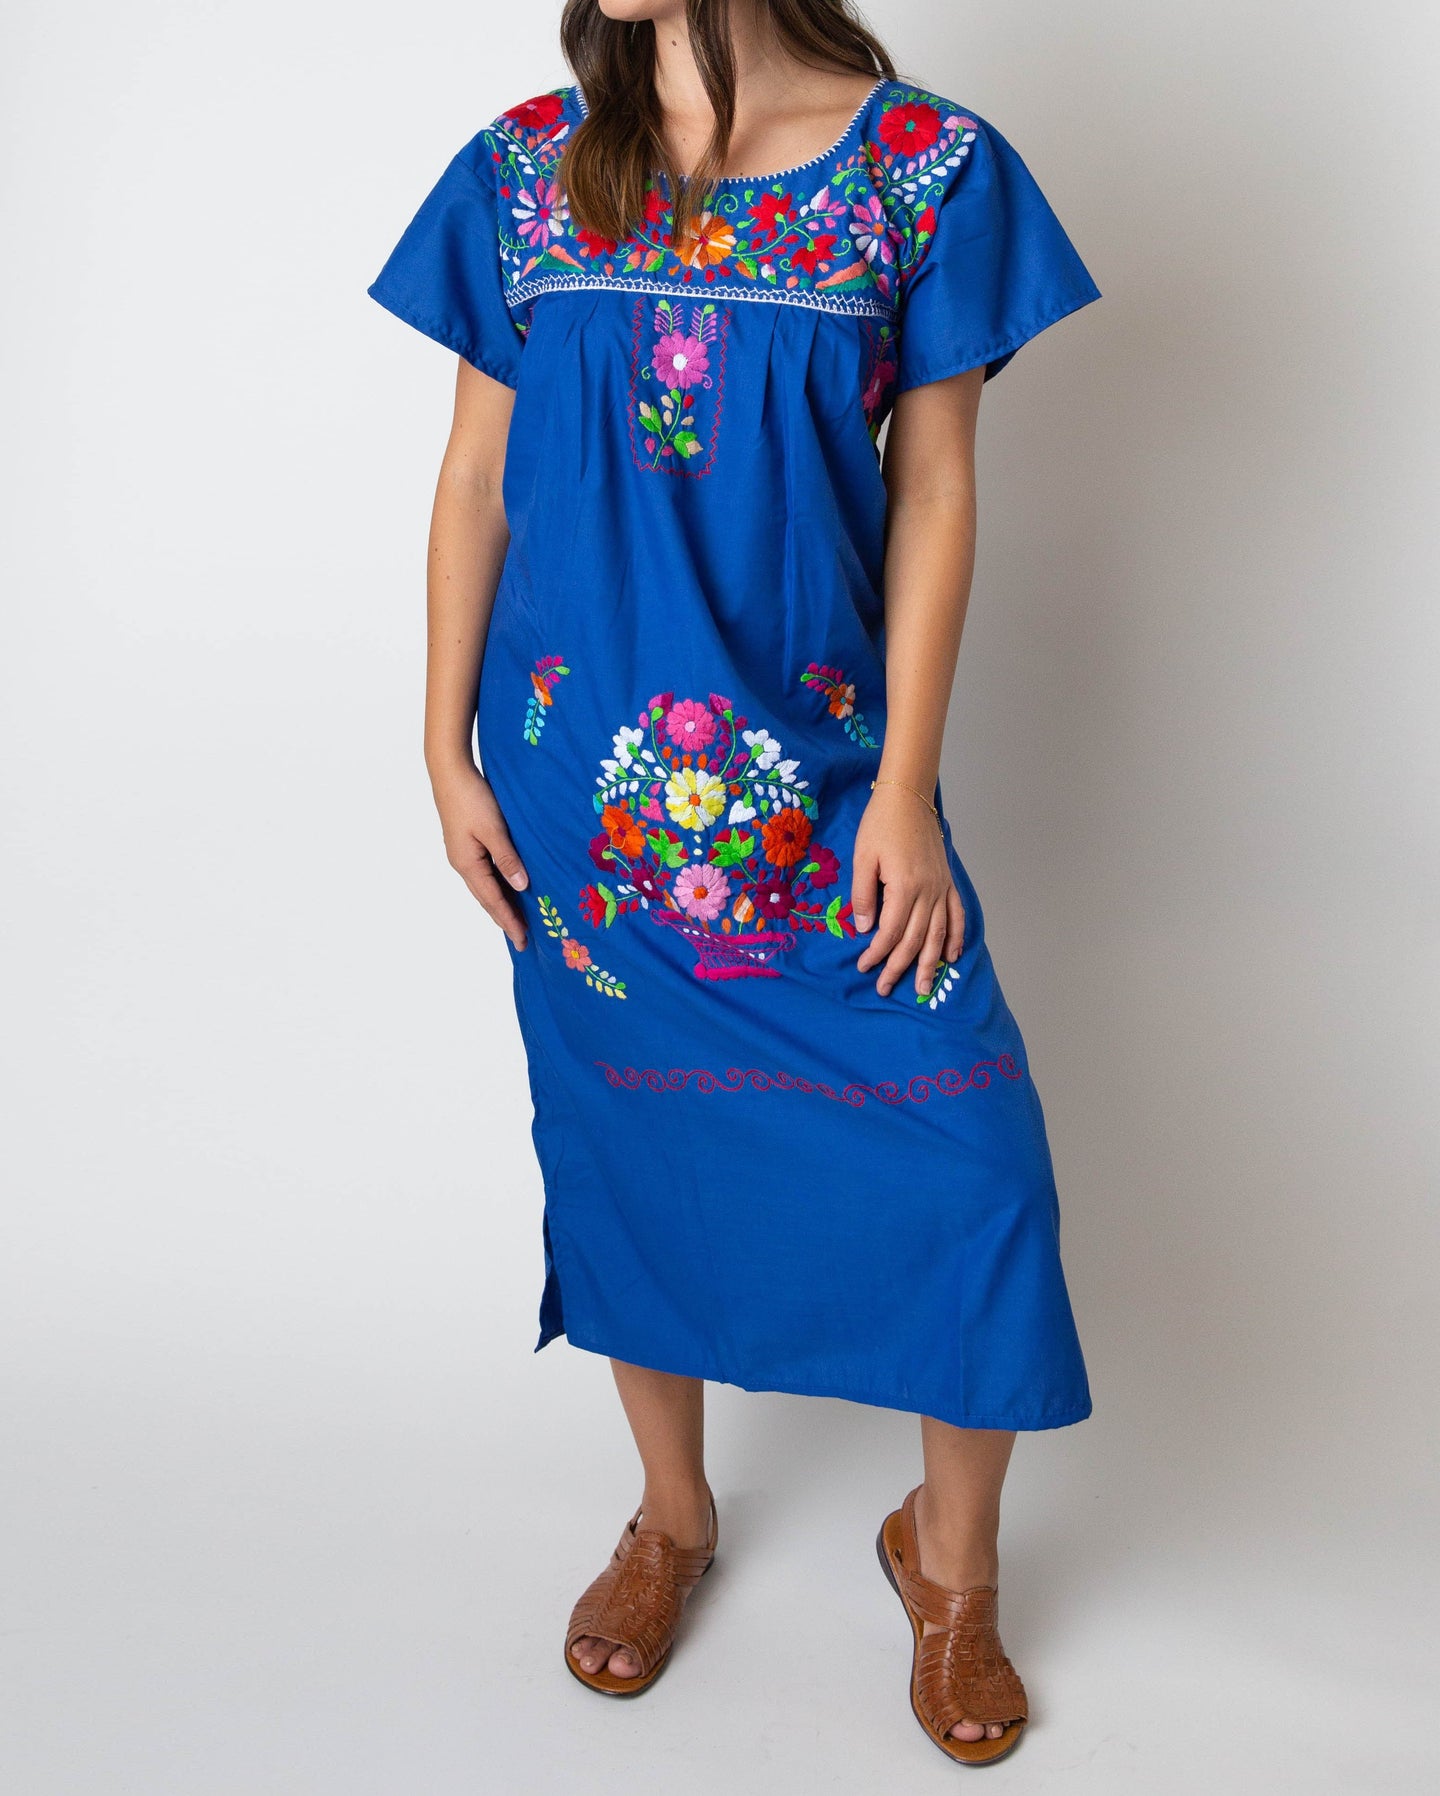 SIDREY Mexican Embroidered Pueblo Dress - Royal Blue